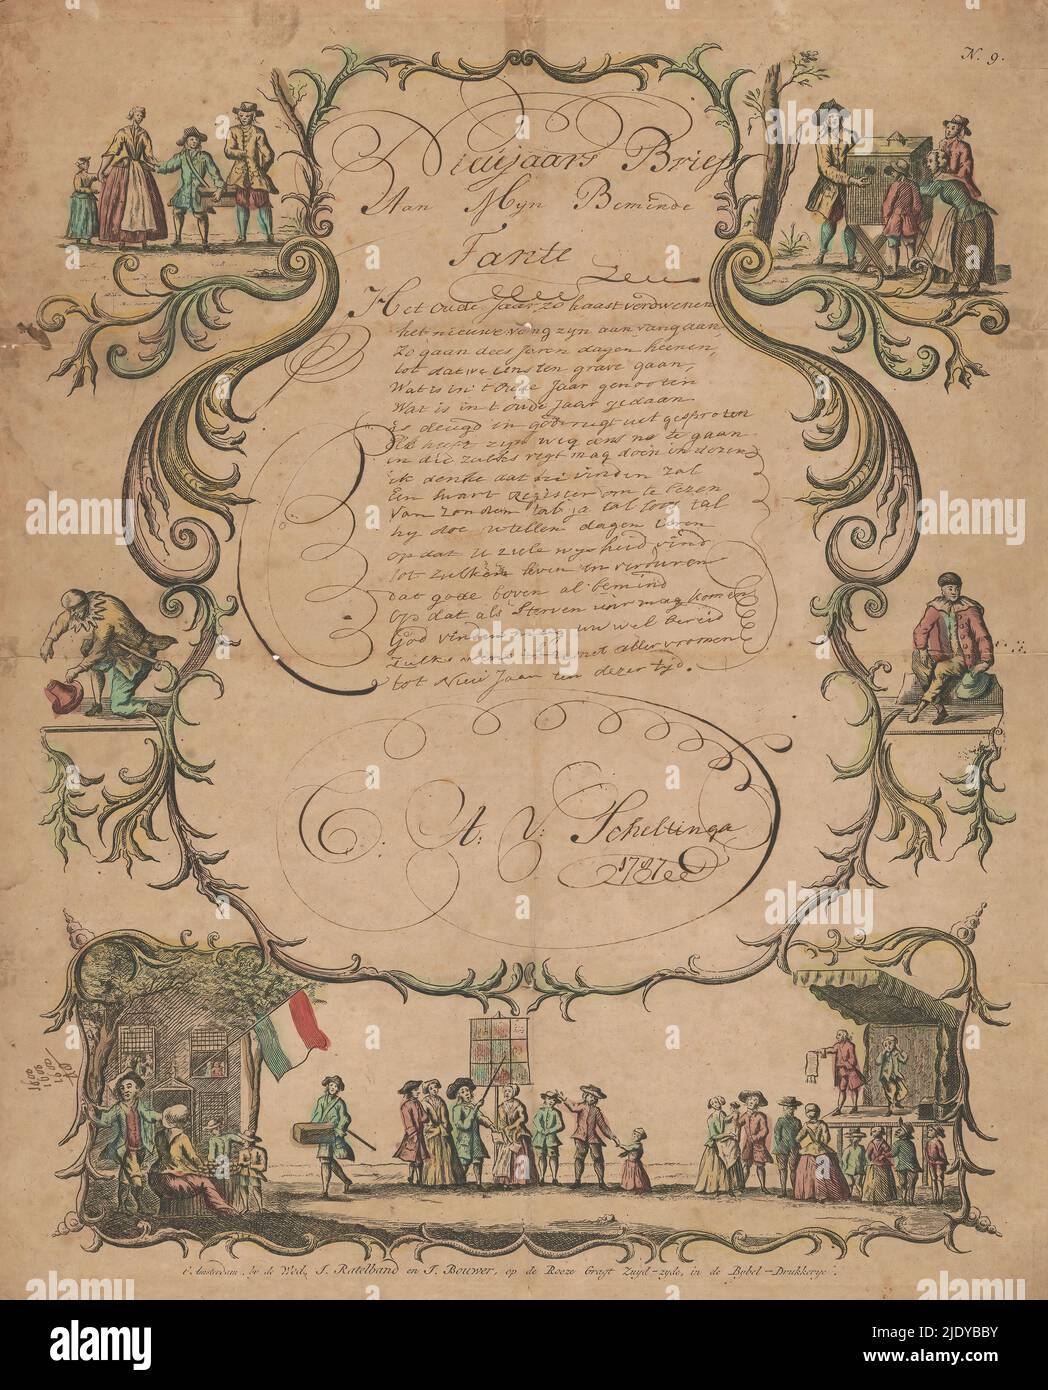 Greeting letter with carnival scenes, Greeting letter with described cartouche within a decorative frame with carnival scenes, including a man with a viewing box and a song singer with a pointer to a collection of prints on a scroll between sticks. Handwritten message in calligraphy (New Year's wish) by A.V. Scheltinga to his aunt. Numbered upper right: N. 9., publisher: weduwe Jeronimus Ratelband en Johannes Bouwer, (mentioned on object), print maker: anonymous, publisher: Amsterdam, print maker: Netherlands, 1767 - 1779 and/or 1787, paper, etching, pen, height 392 mm × width 319 mm Stock Photo